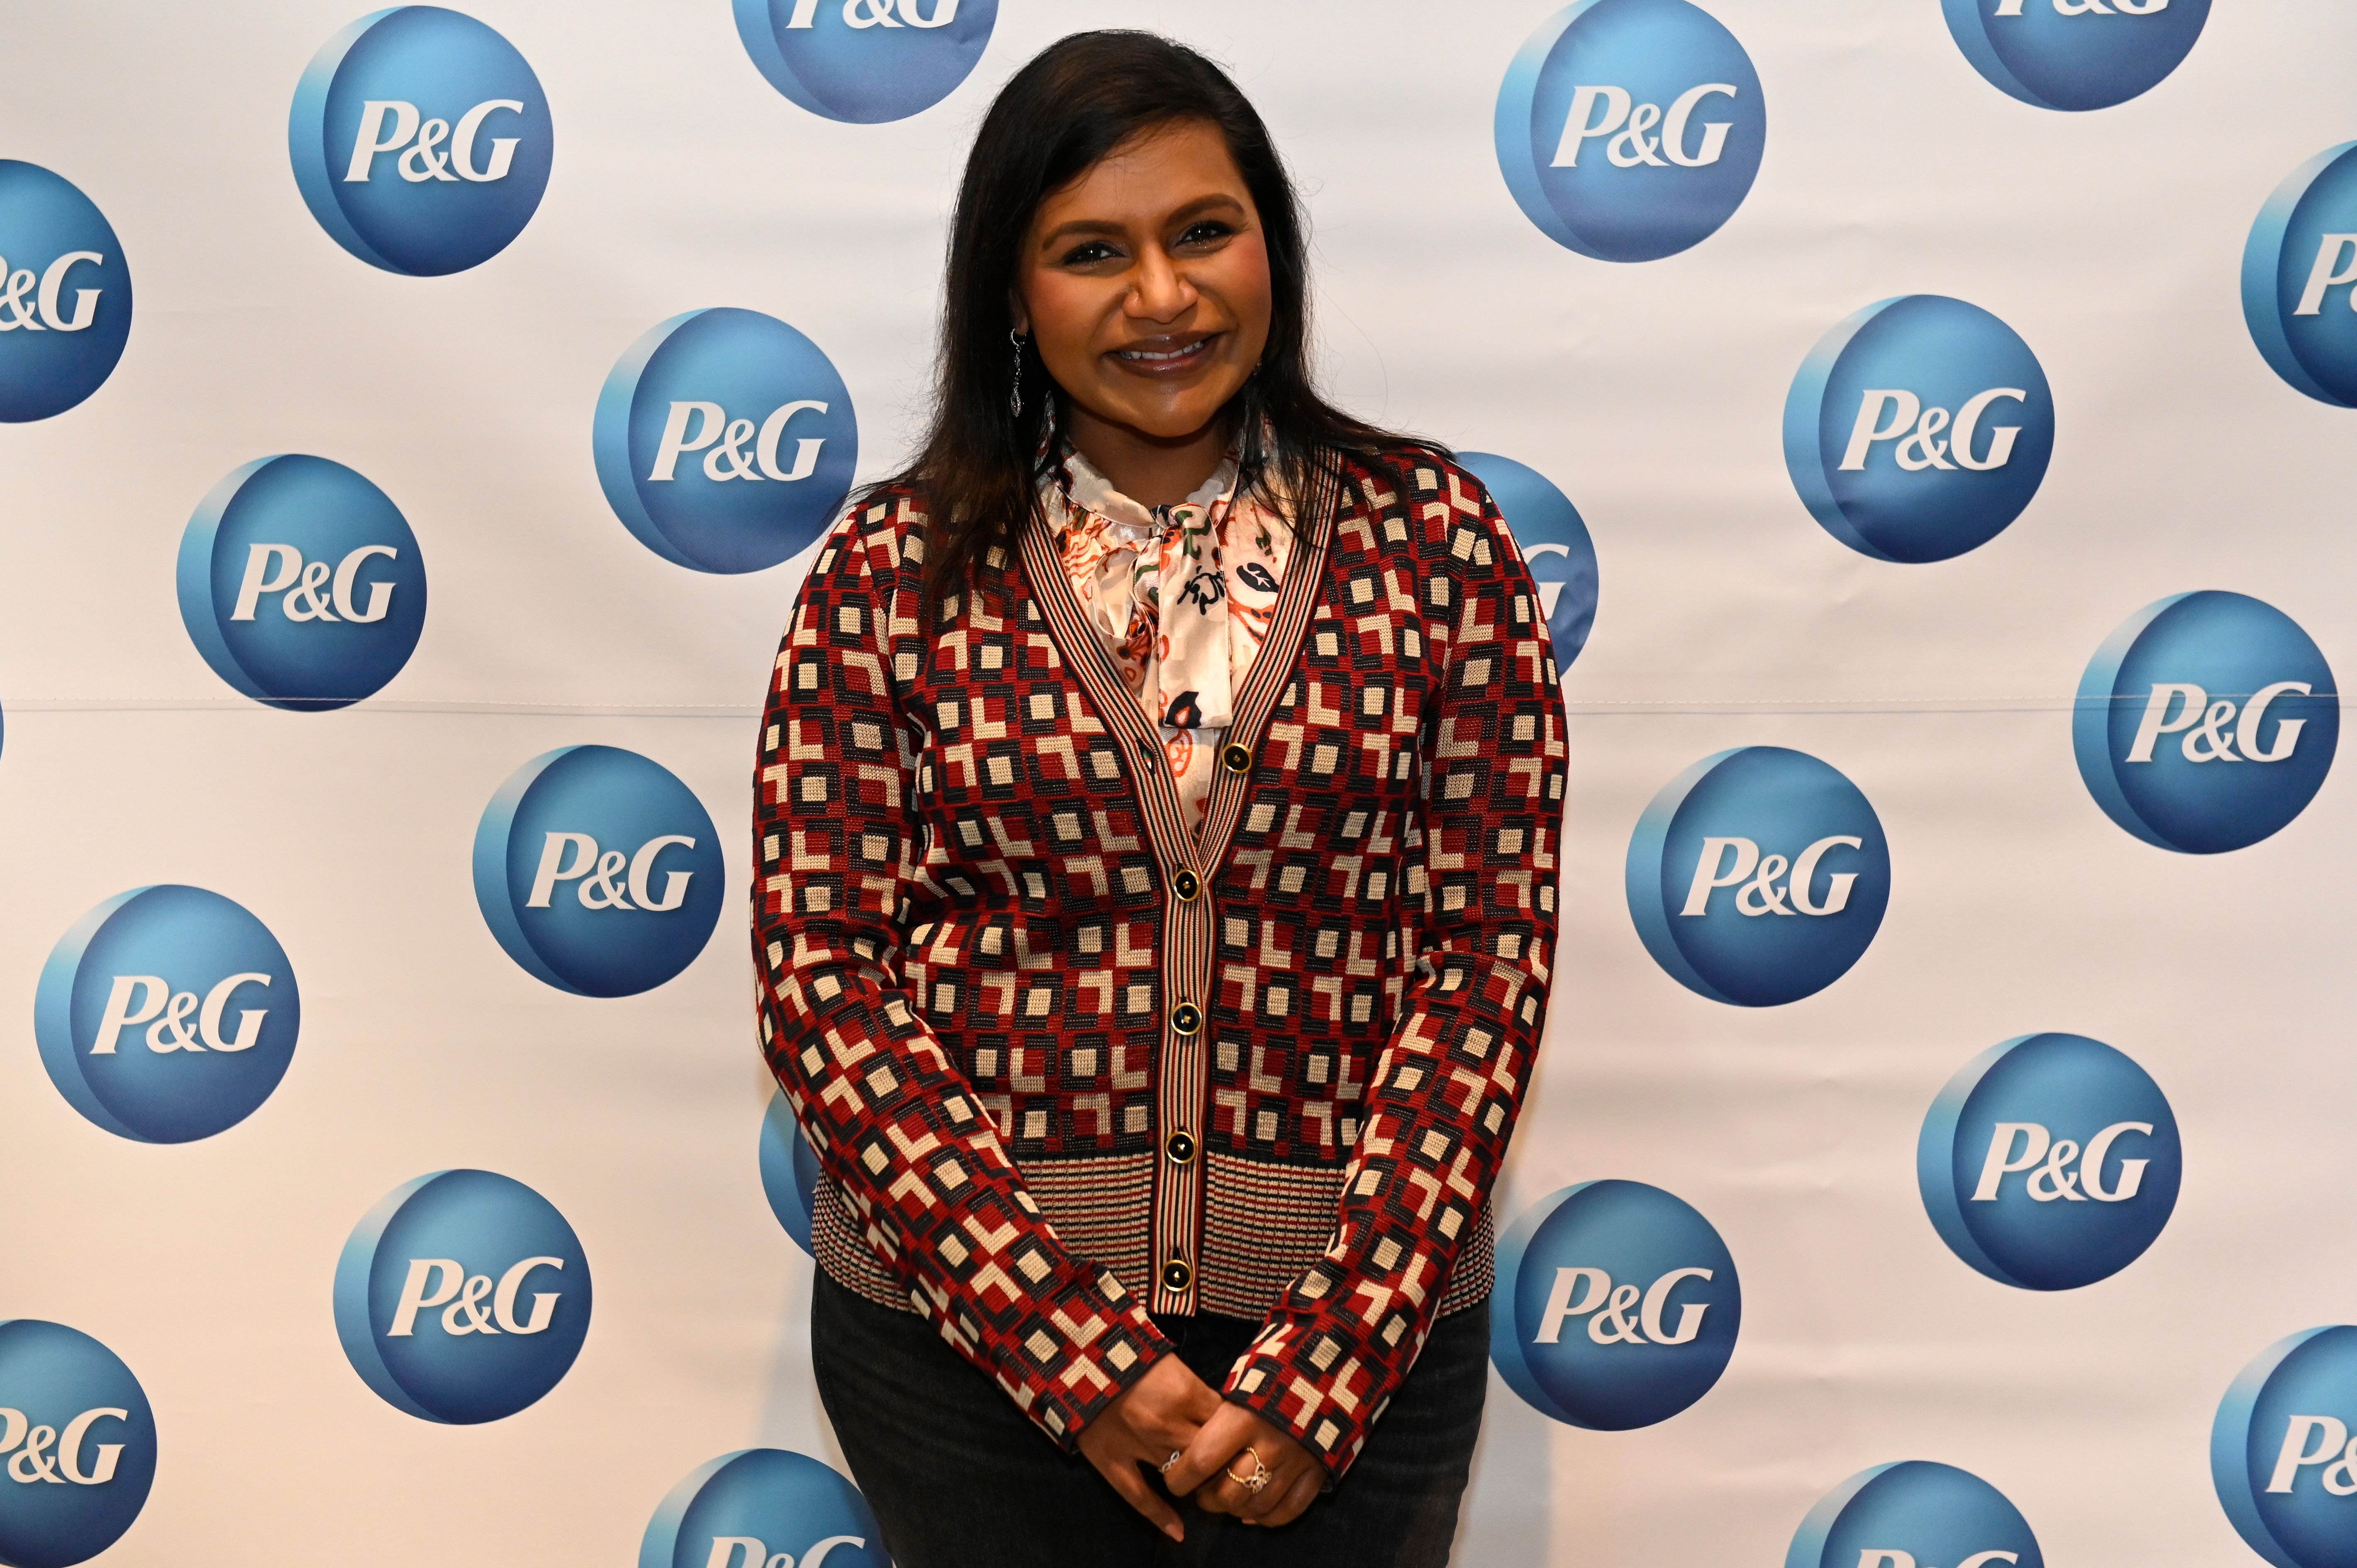 Mindy Kaling at the P&G #WeSeeEqual Forum held at Proctor & Gamble on March 04, 2020, in Cincinnati, Ohio | Photo: Duane Prokop/Getty Images